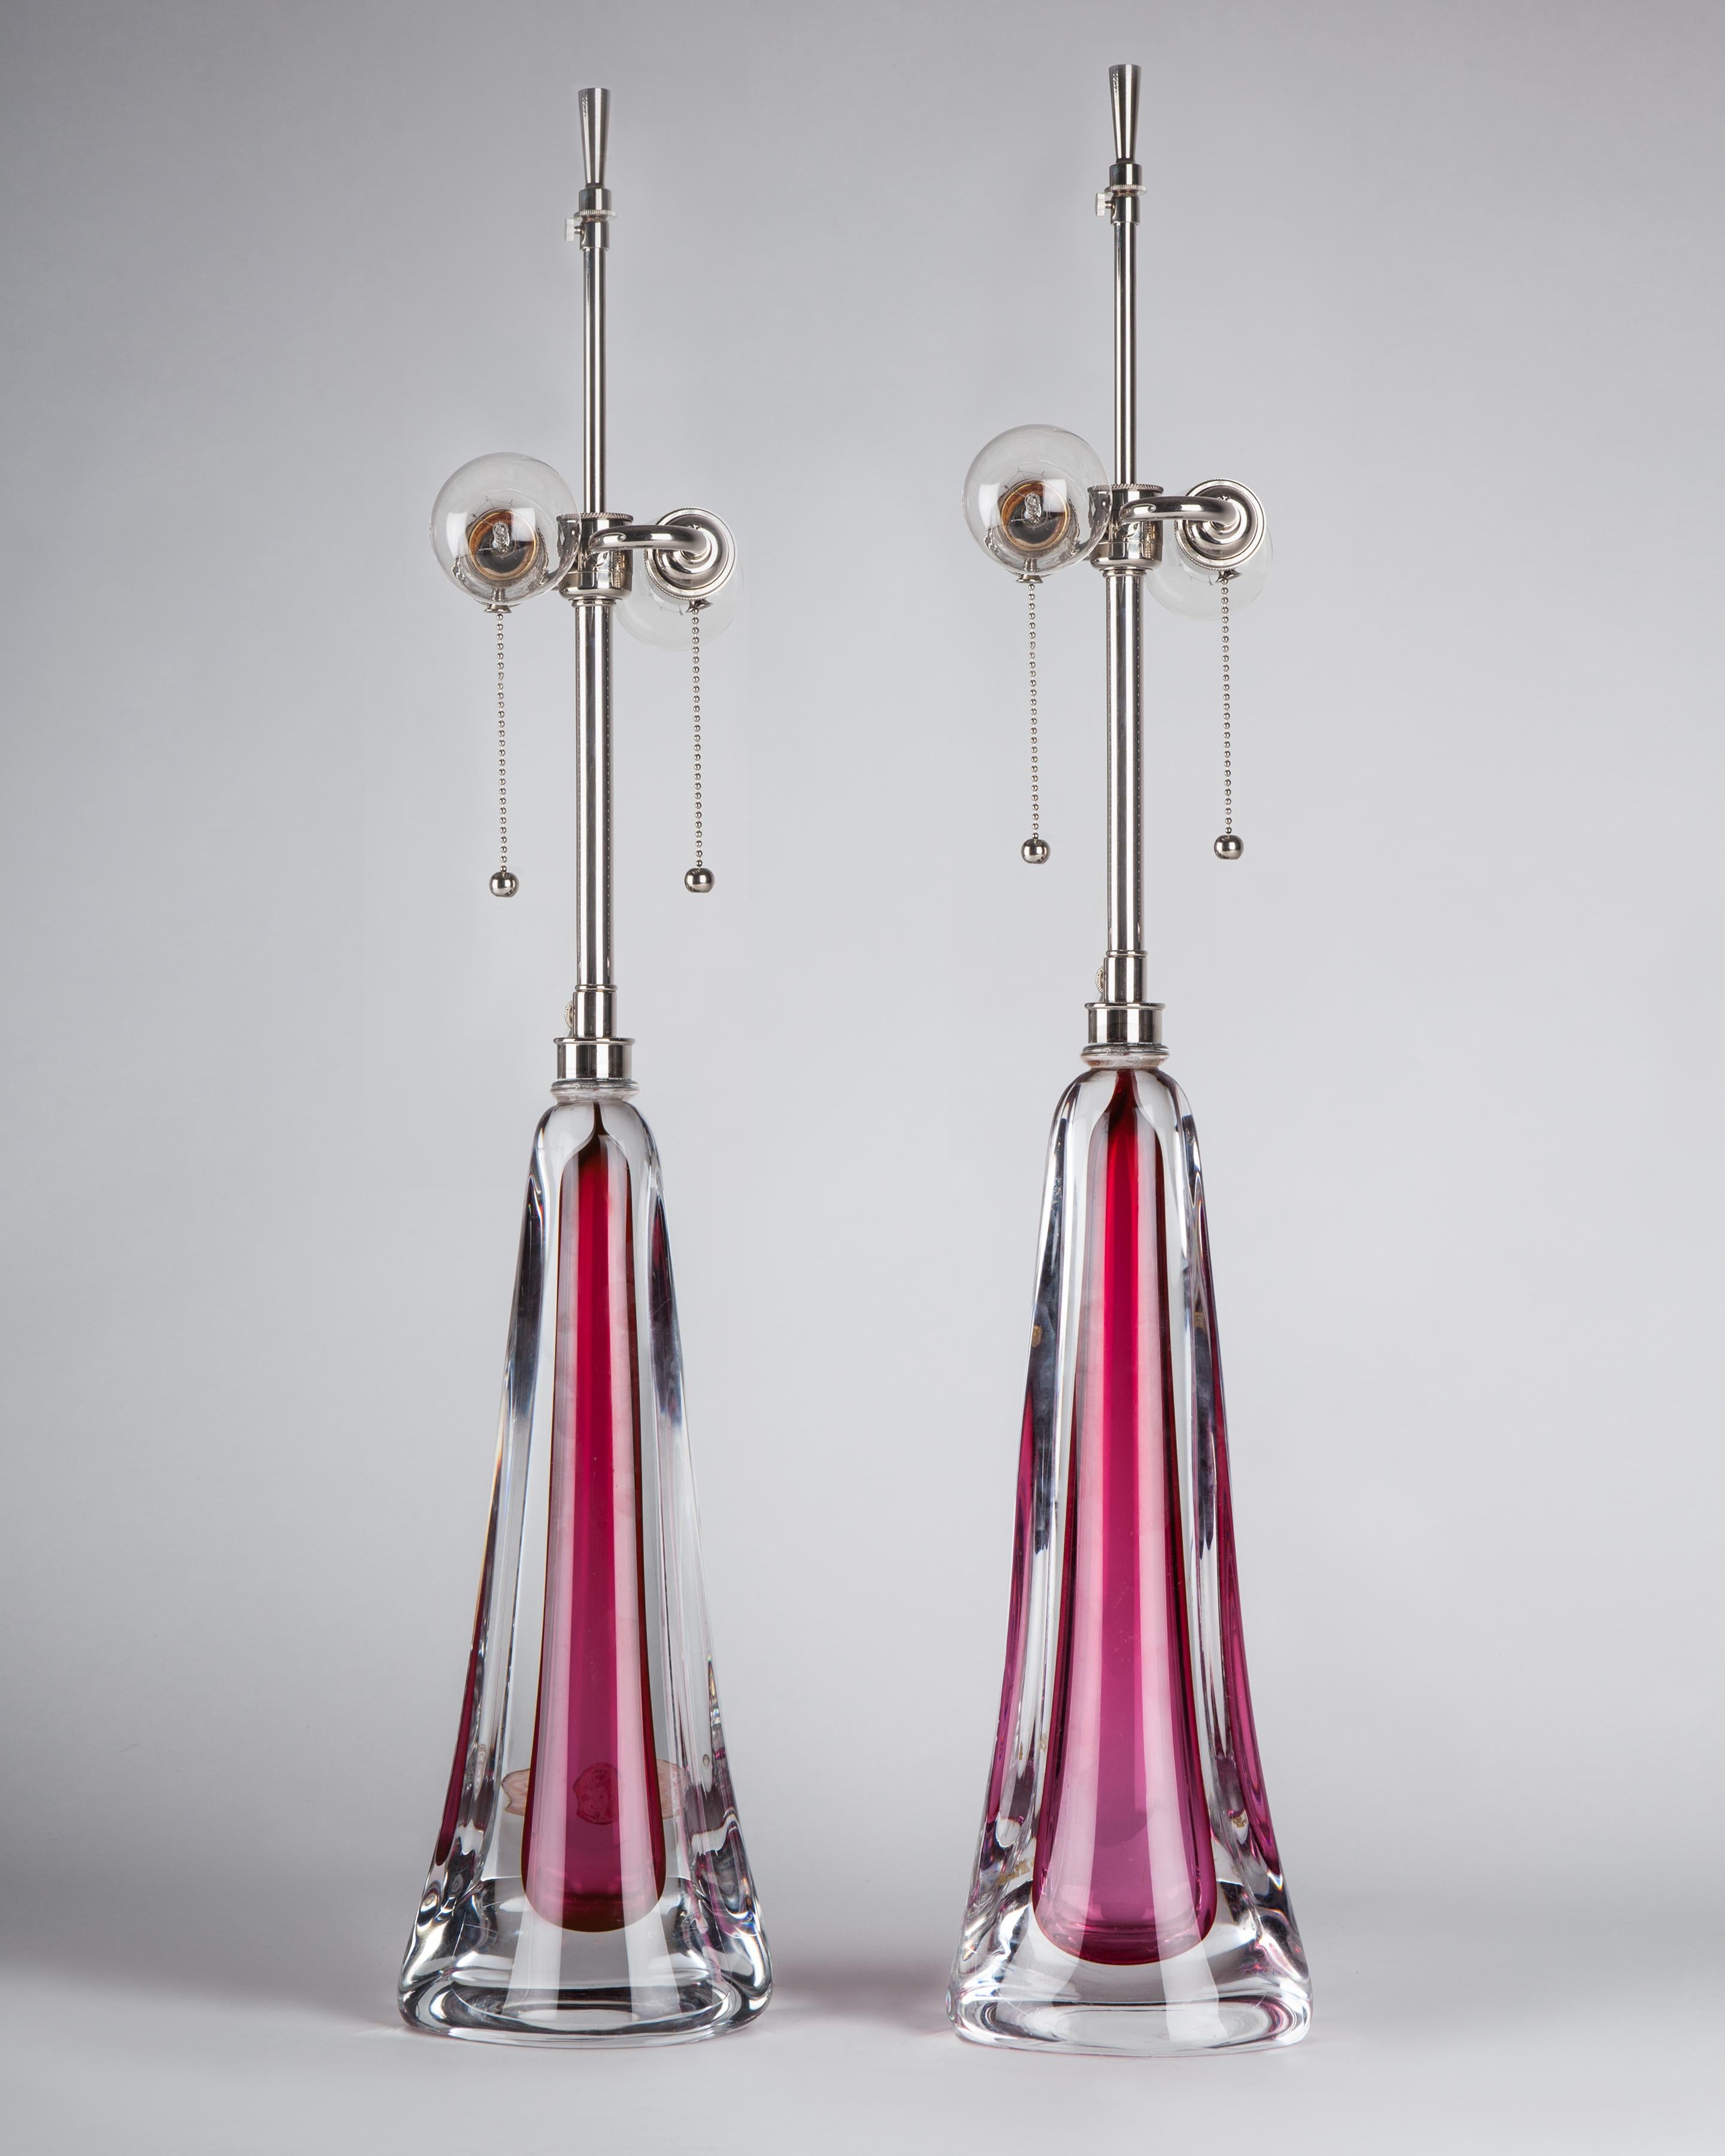 ATL1957
A pair of vintage lamps with handblown cased ruby glass bases with polished nickel fittings. Signed by the Belgian maker Val St. Lambert. Due to the antique nature of these fixtures there may be nicks and imperfections in the glass as well